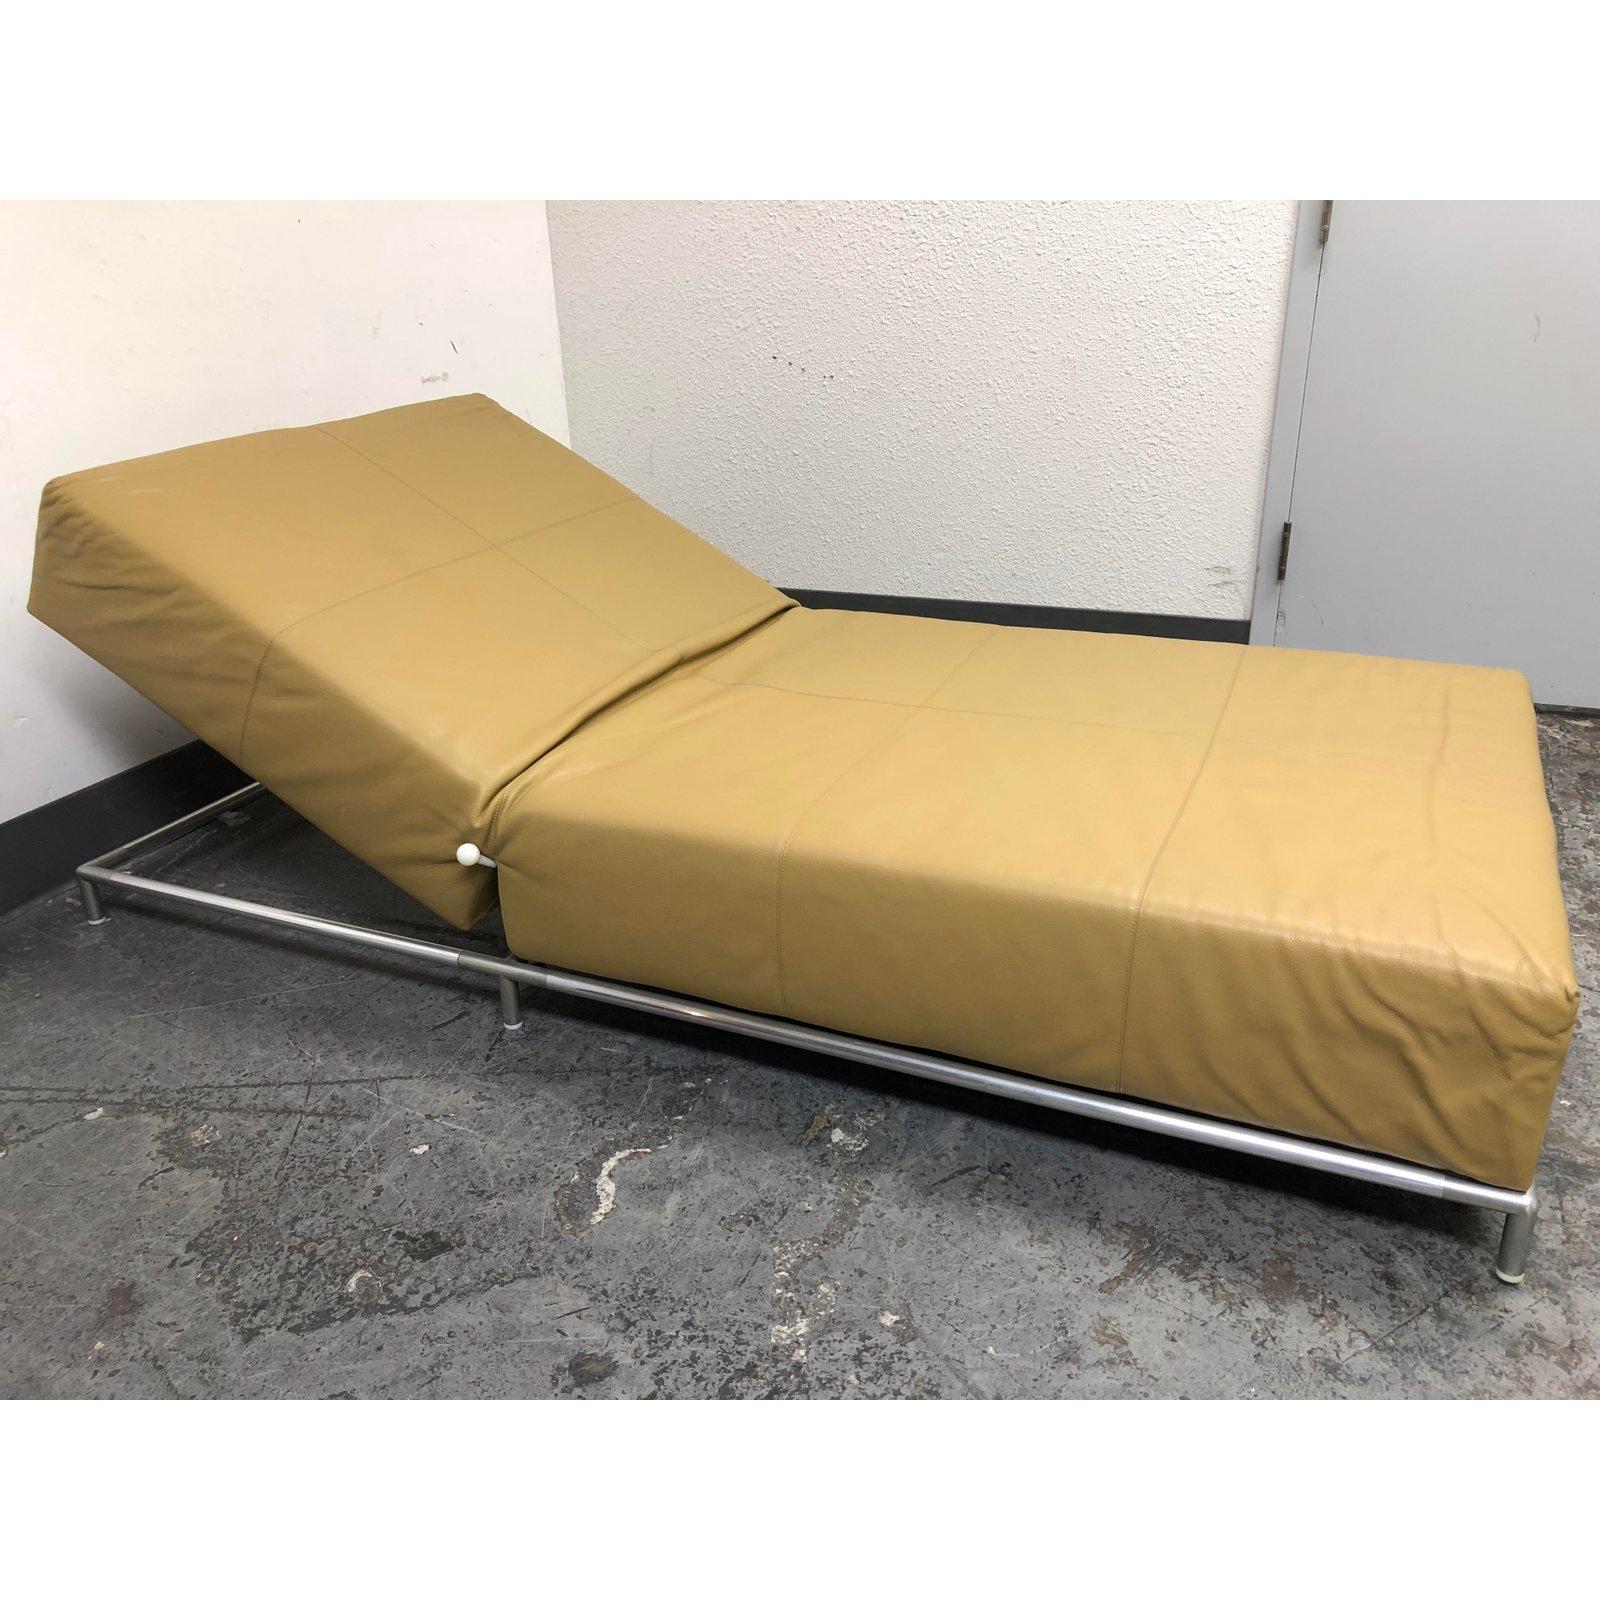 A soft gold leather chaise, from George Pouff for B&B Italia . Crafted in Italy, as only Italians can, this sleek lounge is brilliantly simple. The metal frame supports the upholstered segments that adjust for comfort. A pullout knob can adjust the